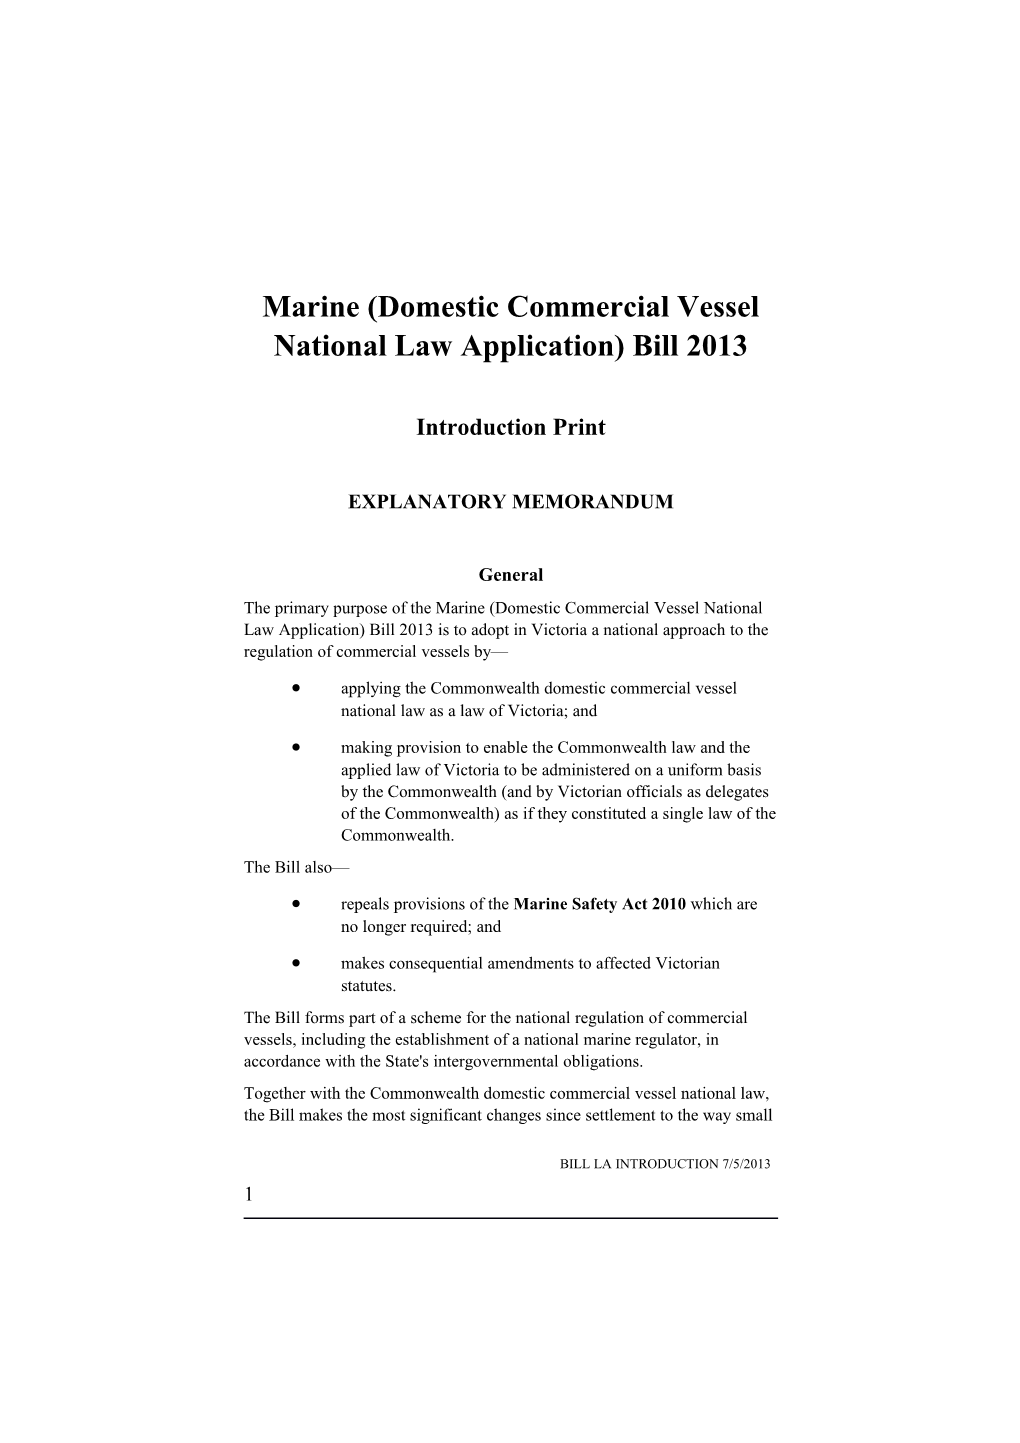 Marine (Domestic Commercial Vessel National Law Application) Bill 2013